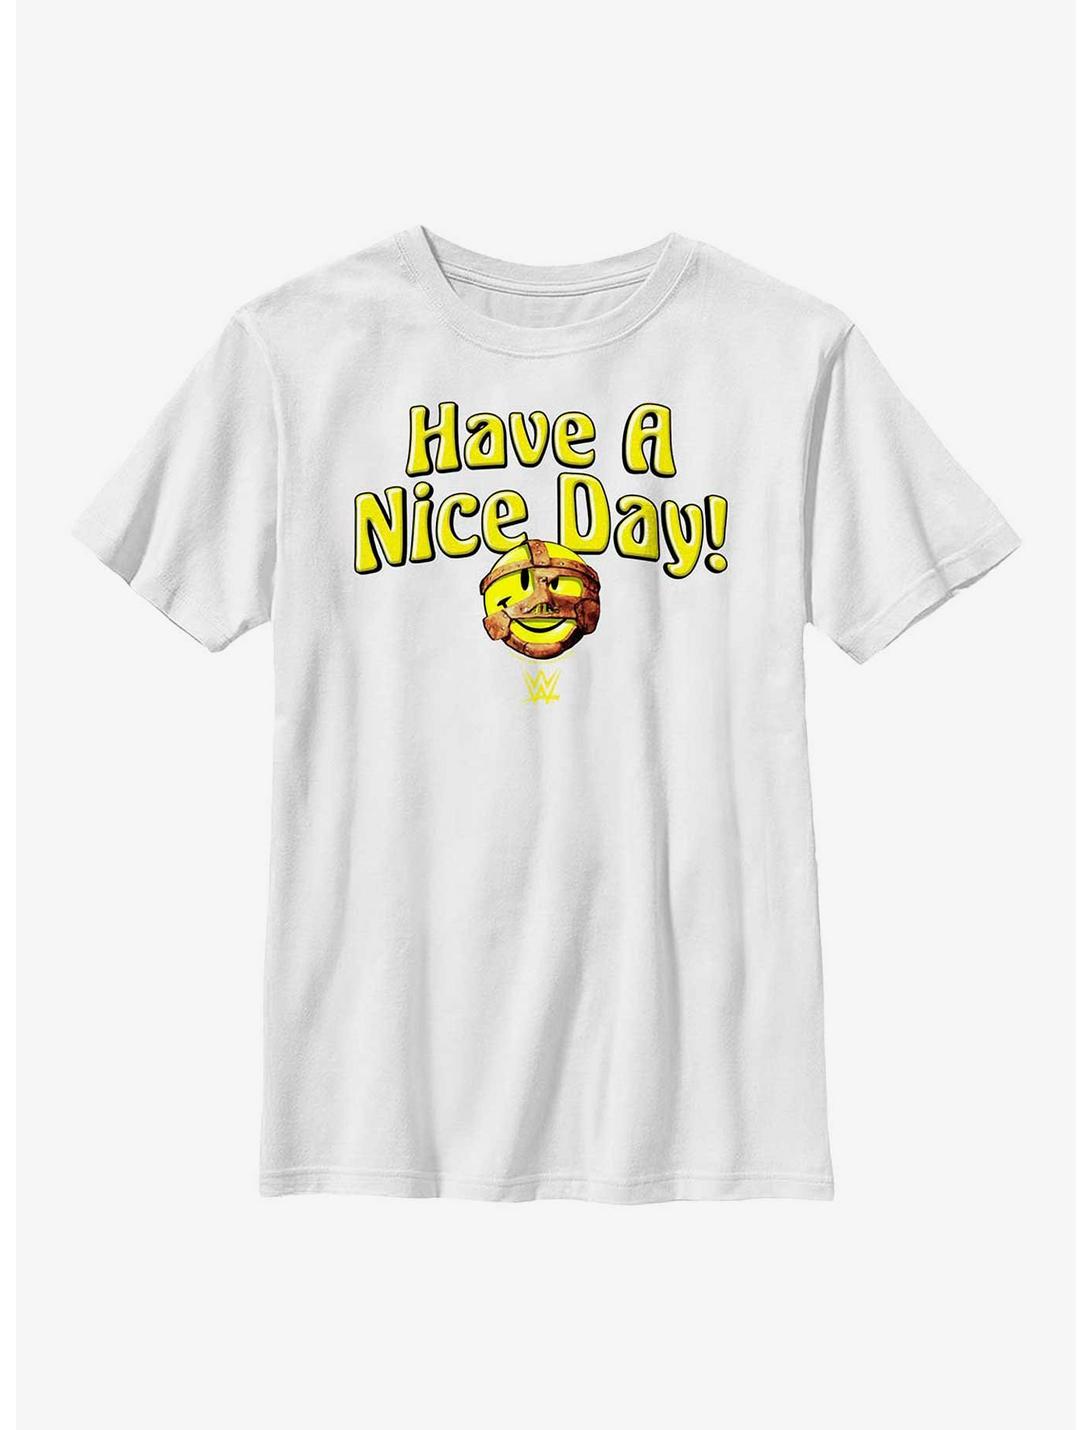 WWE Mick Foley Mankind Have A Nice Day! Icon Youth T-Shirt WHITE |